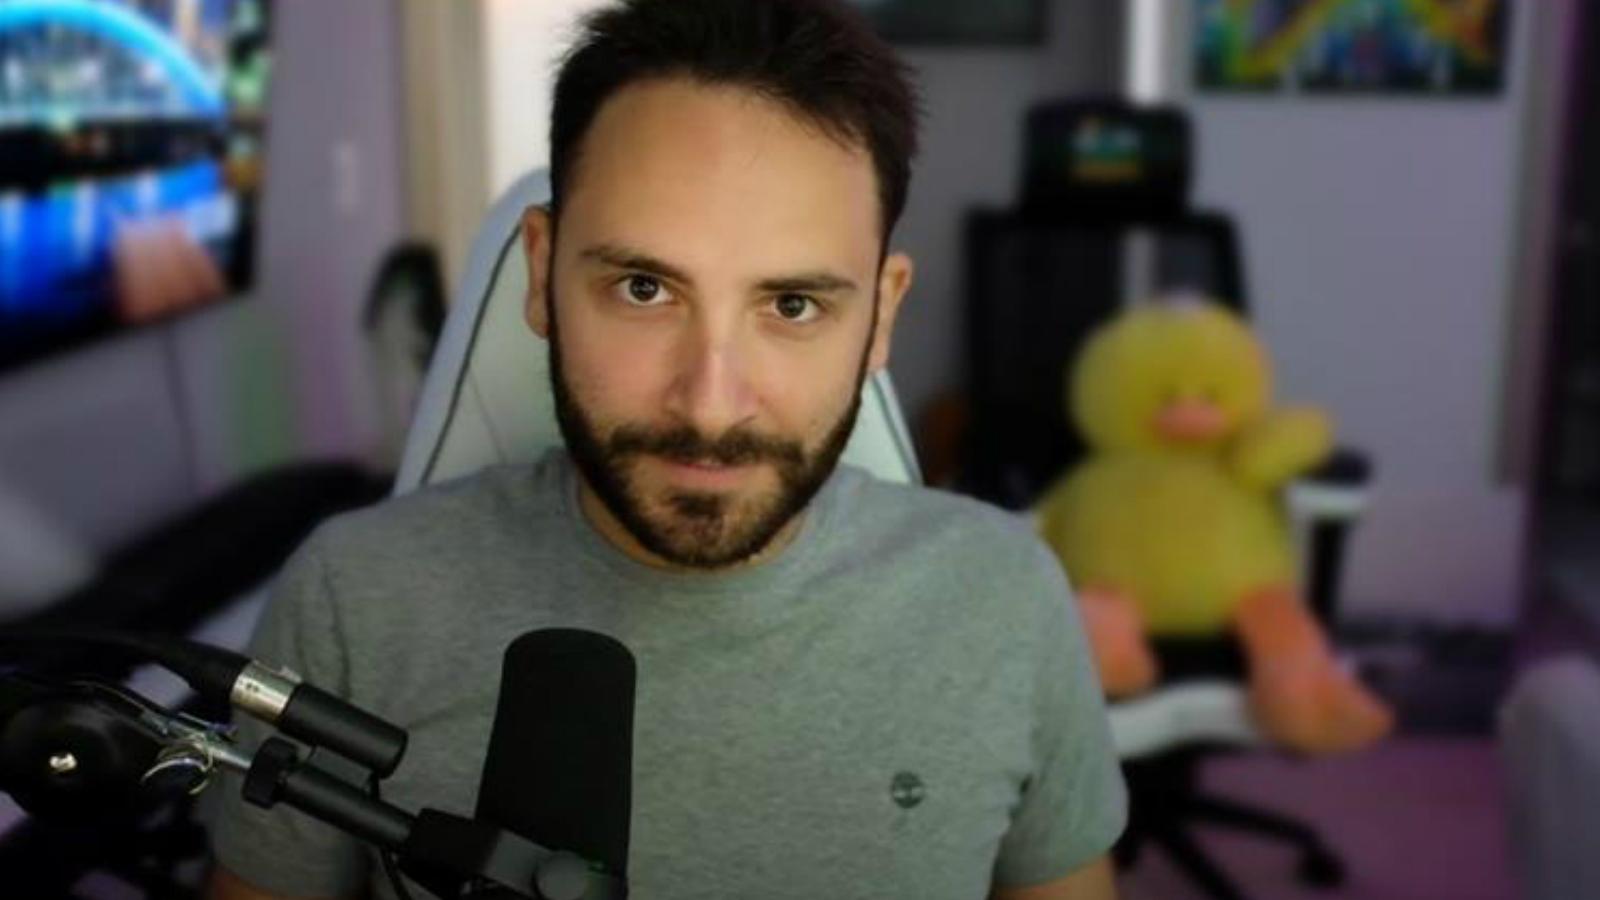 reckful looking into the camera